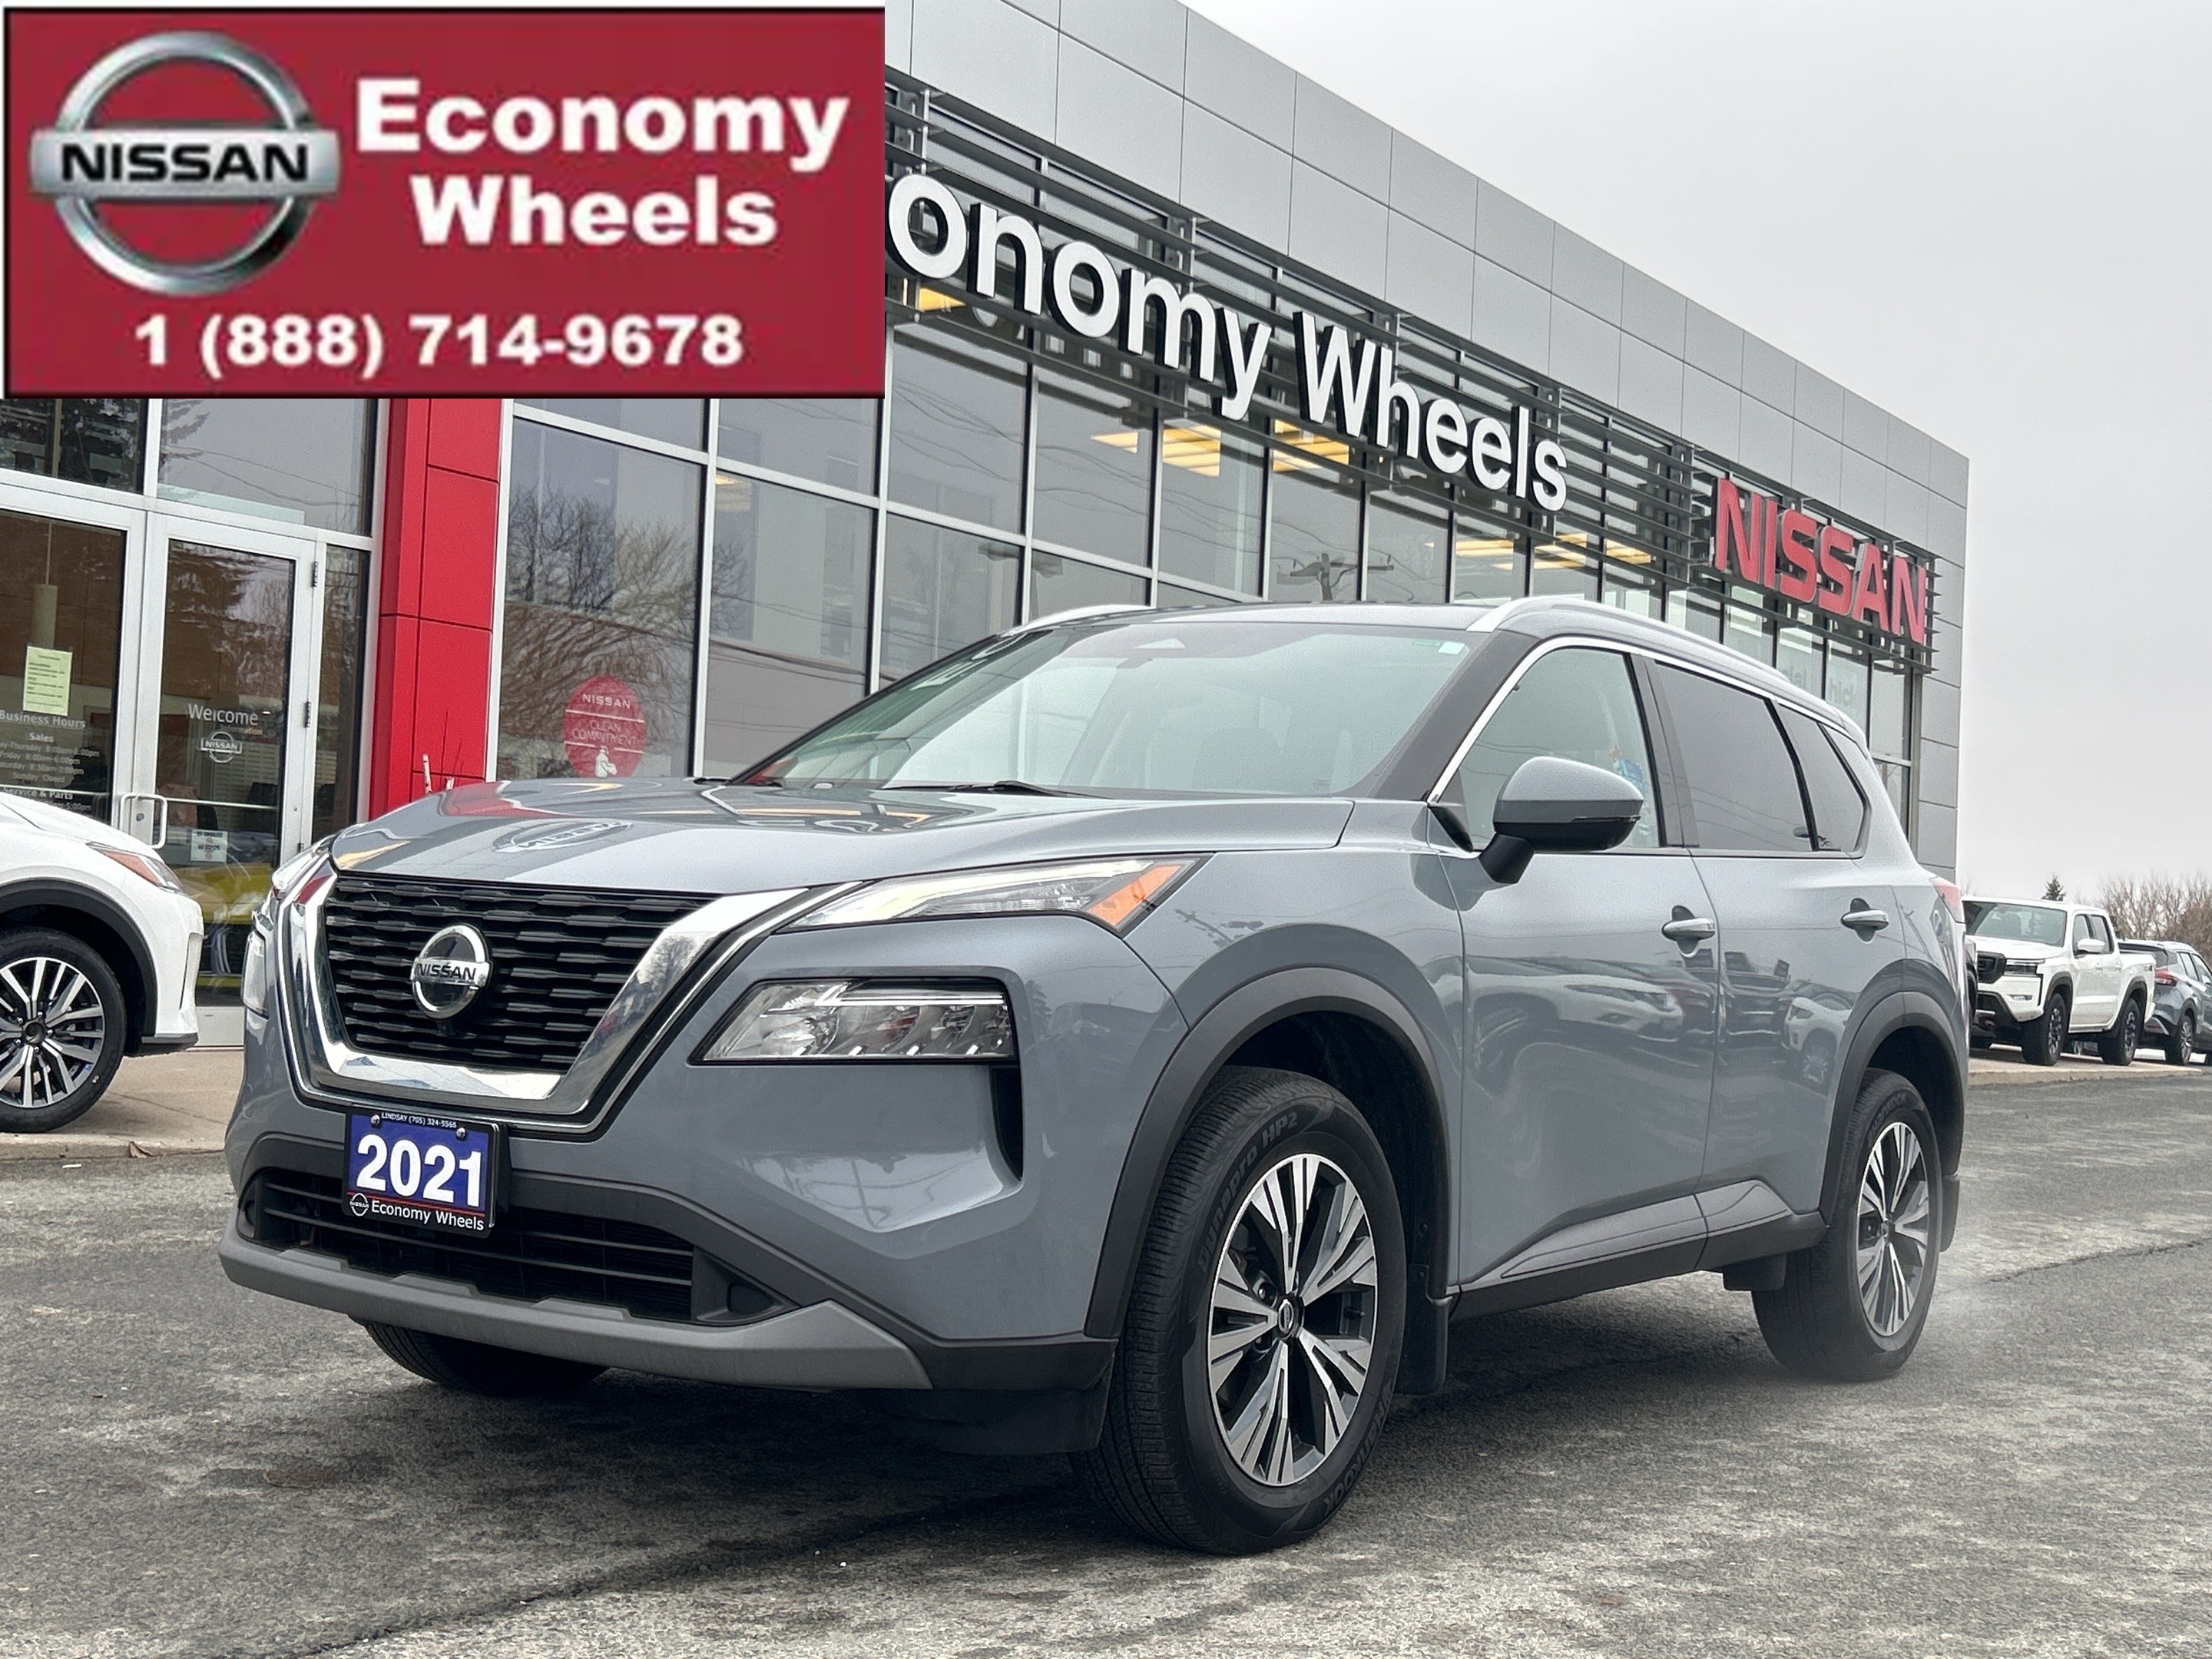 2021 Nissan Rogue SV Prem w/Lther/PwrGate/RearHtdSeat/SunRoof/360Cam